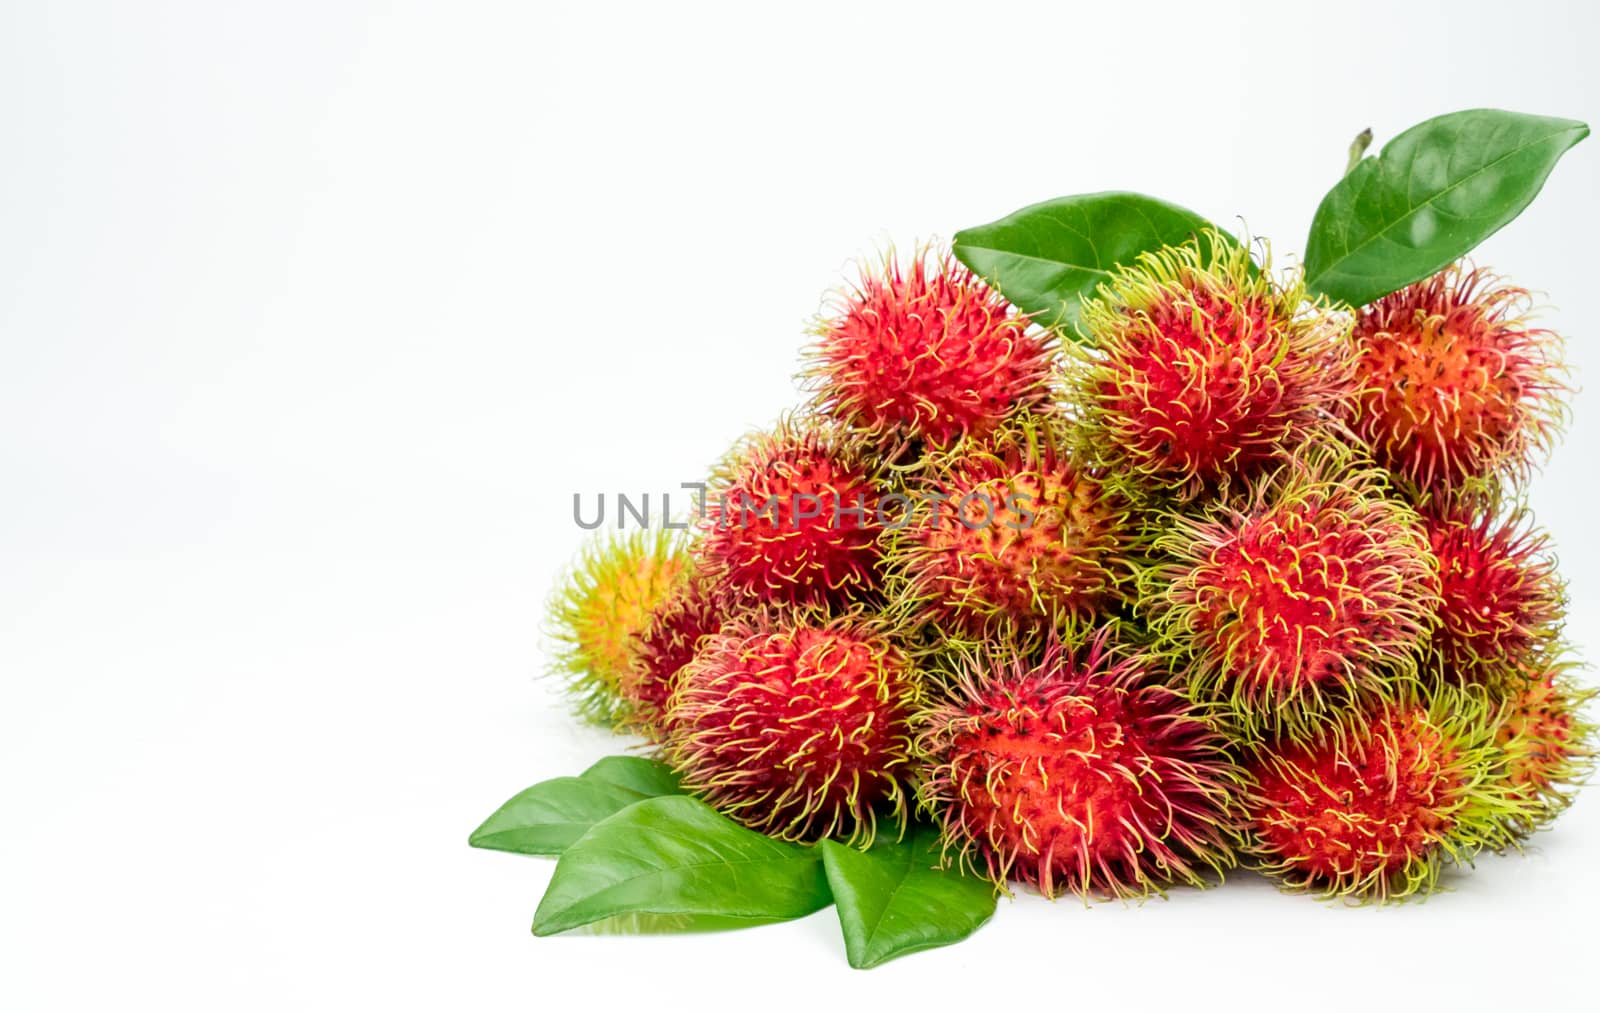 Fresh red ripe rambutan (Nephelium lappaceum) with leaves isolated on white background. Thai dessert sweet fruits. by Fahroni